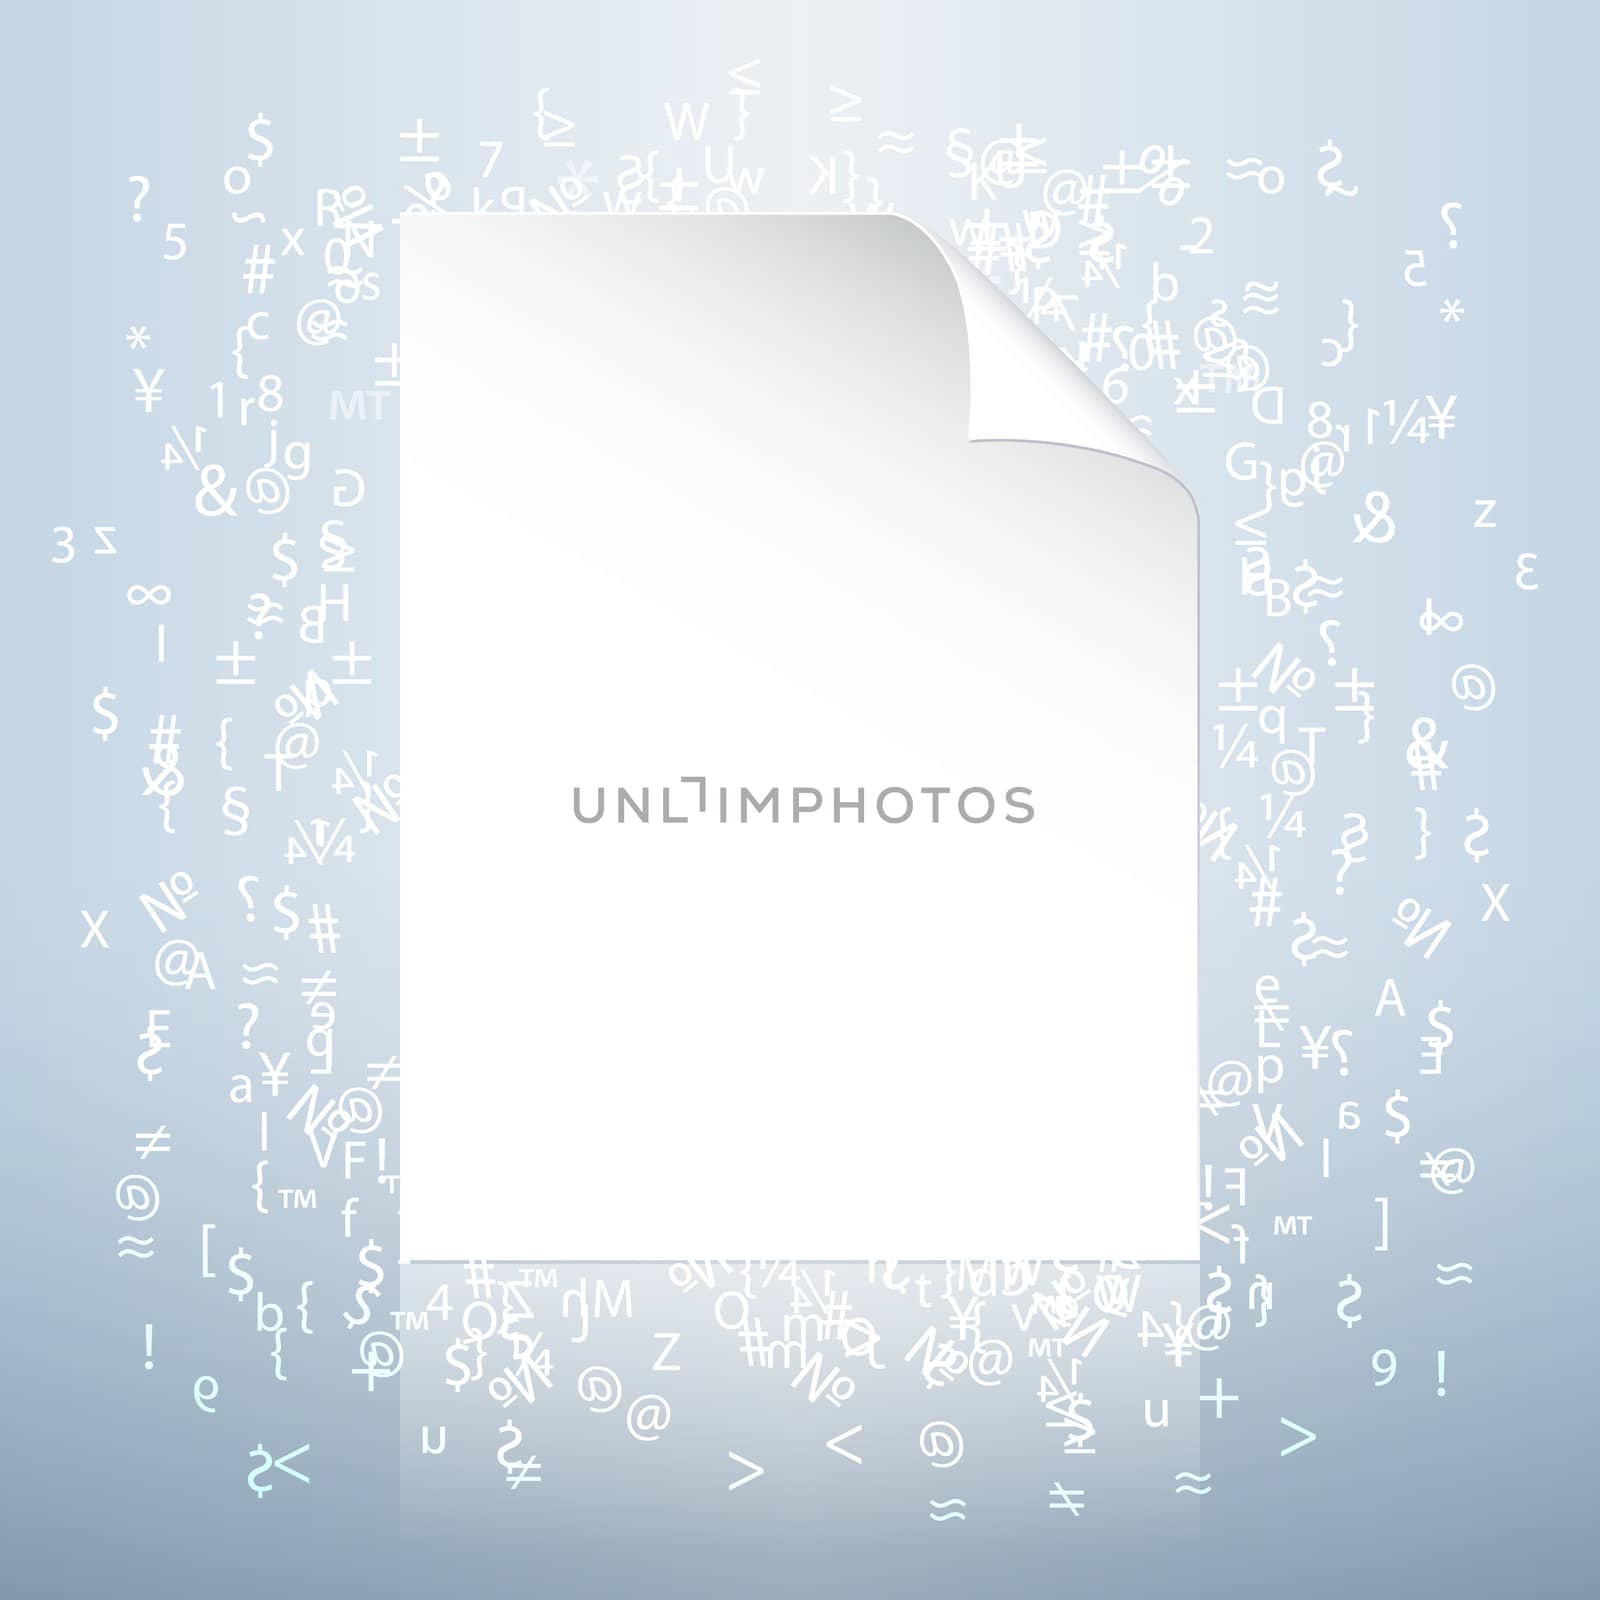 White realistic text document icon with folded corner over glossy surface with glowing white characters
